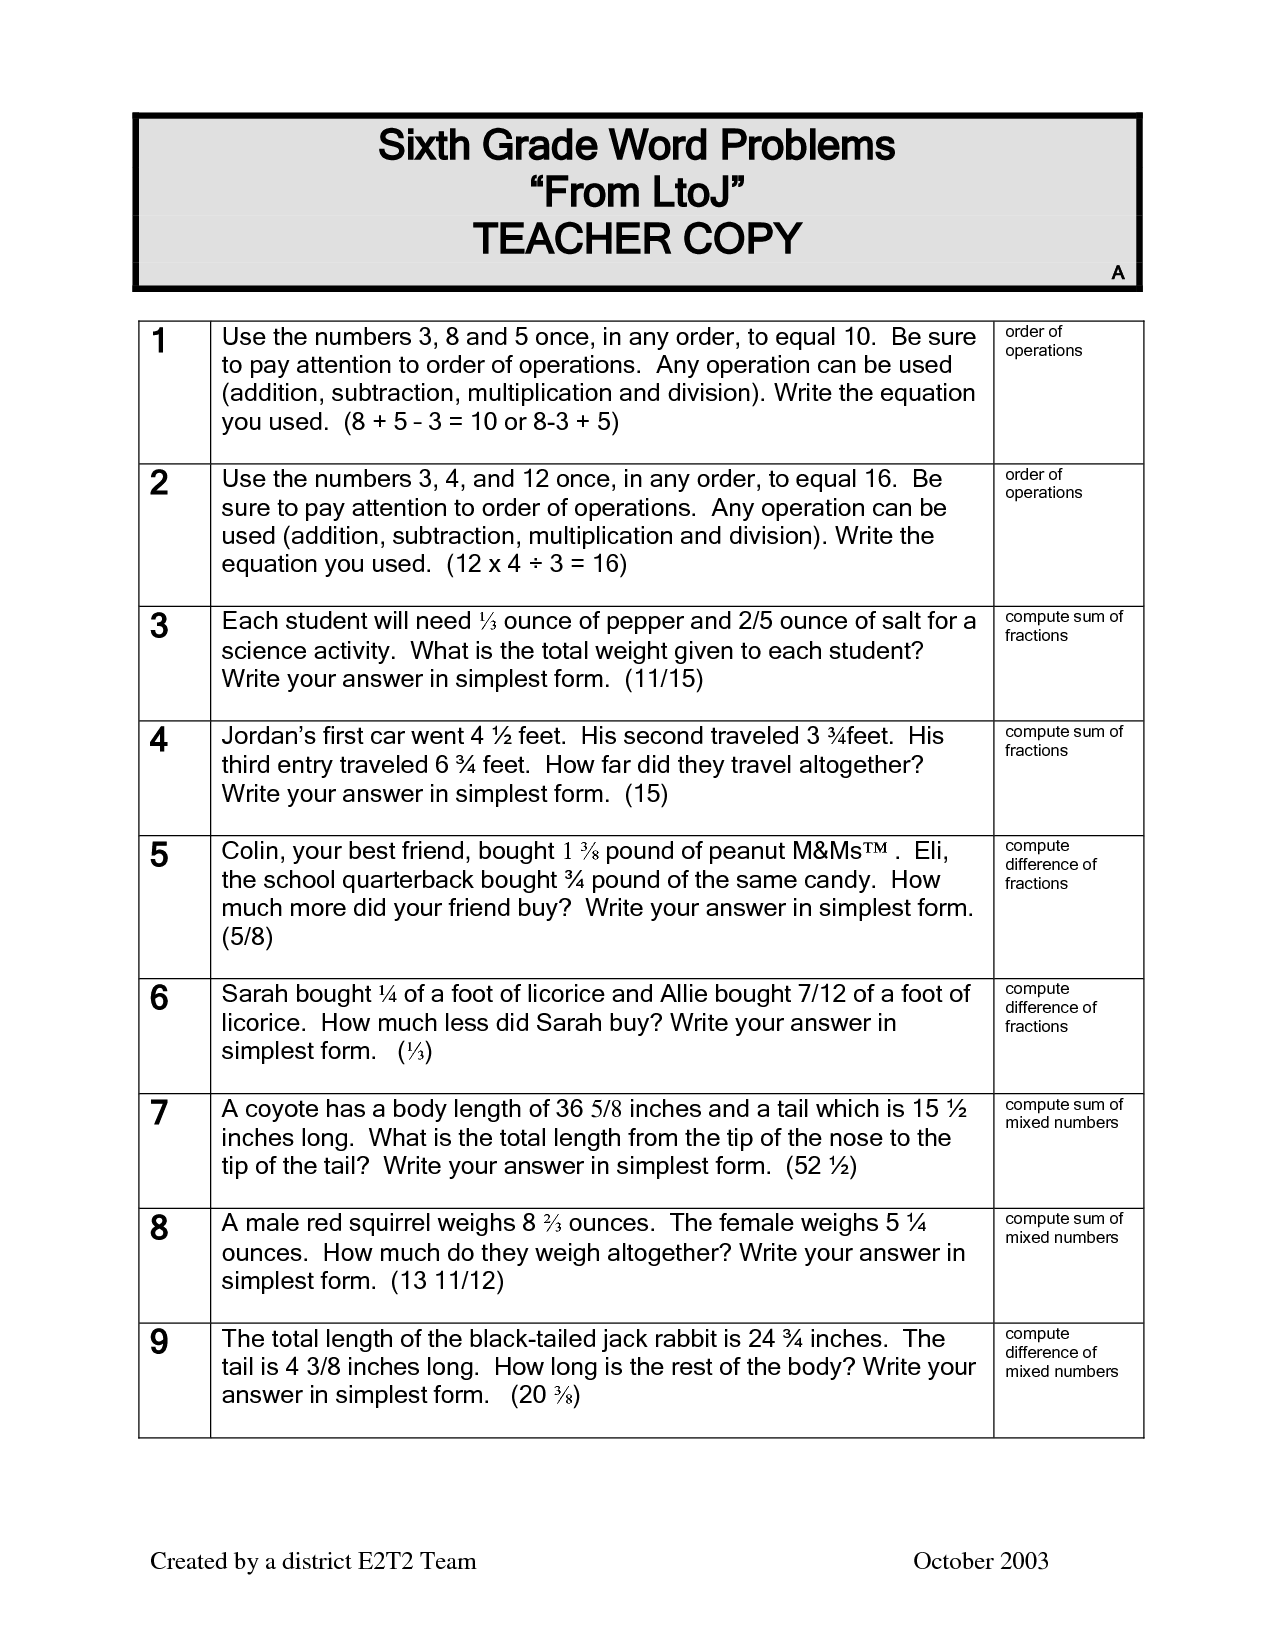 free-problem-solving-worksheets-for-adults-coping-skills-worksheets